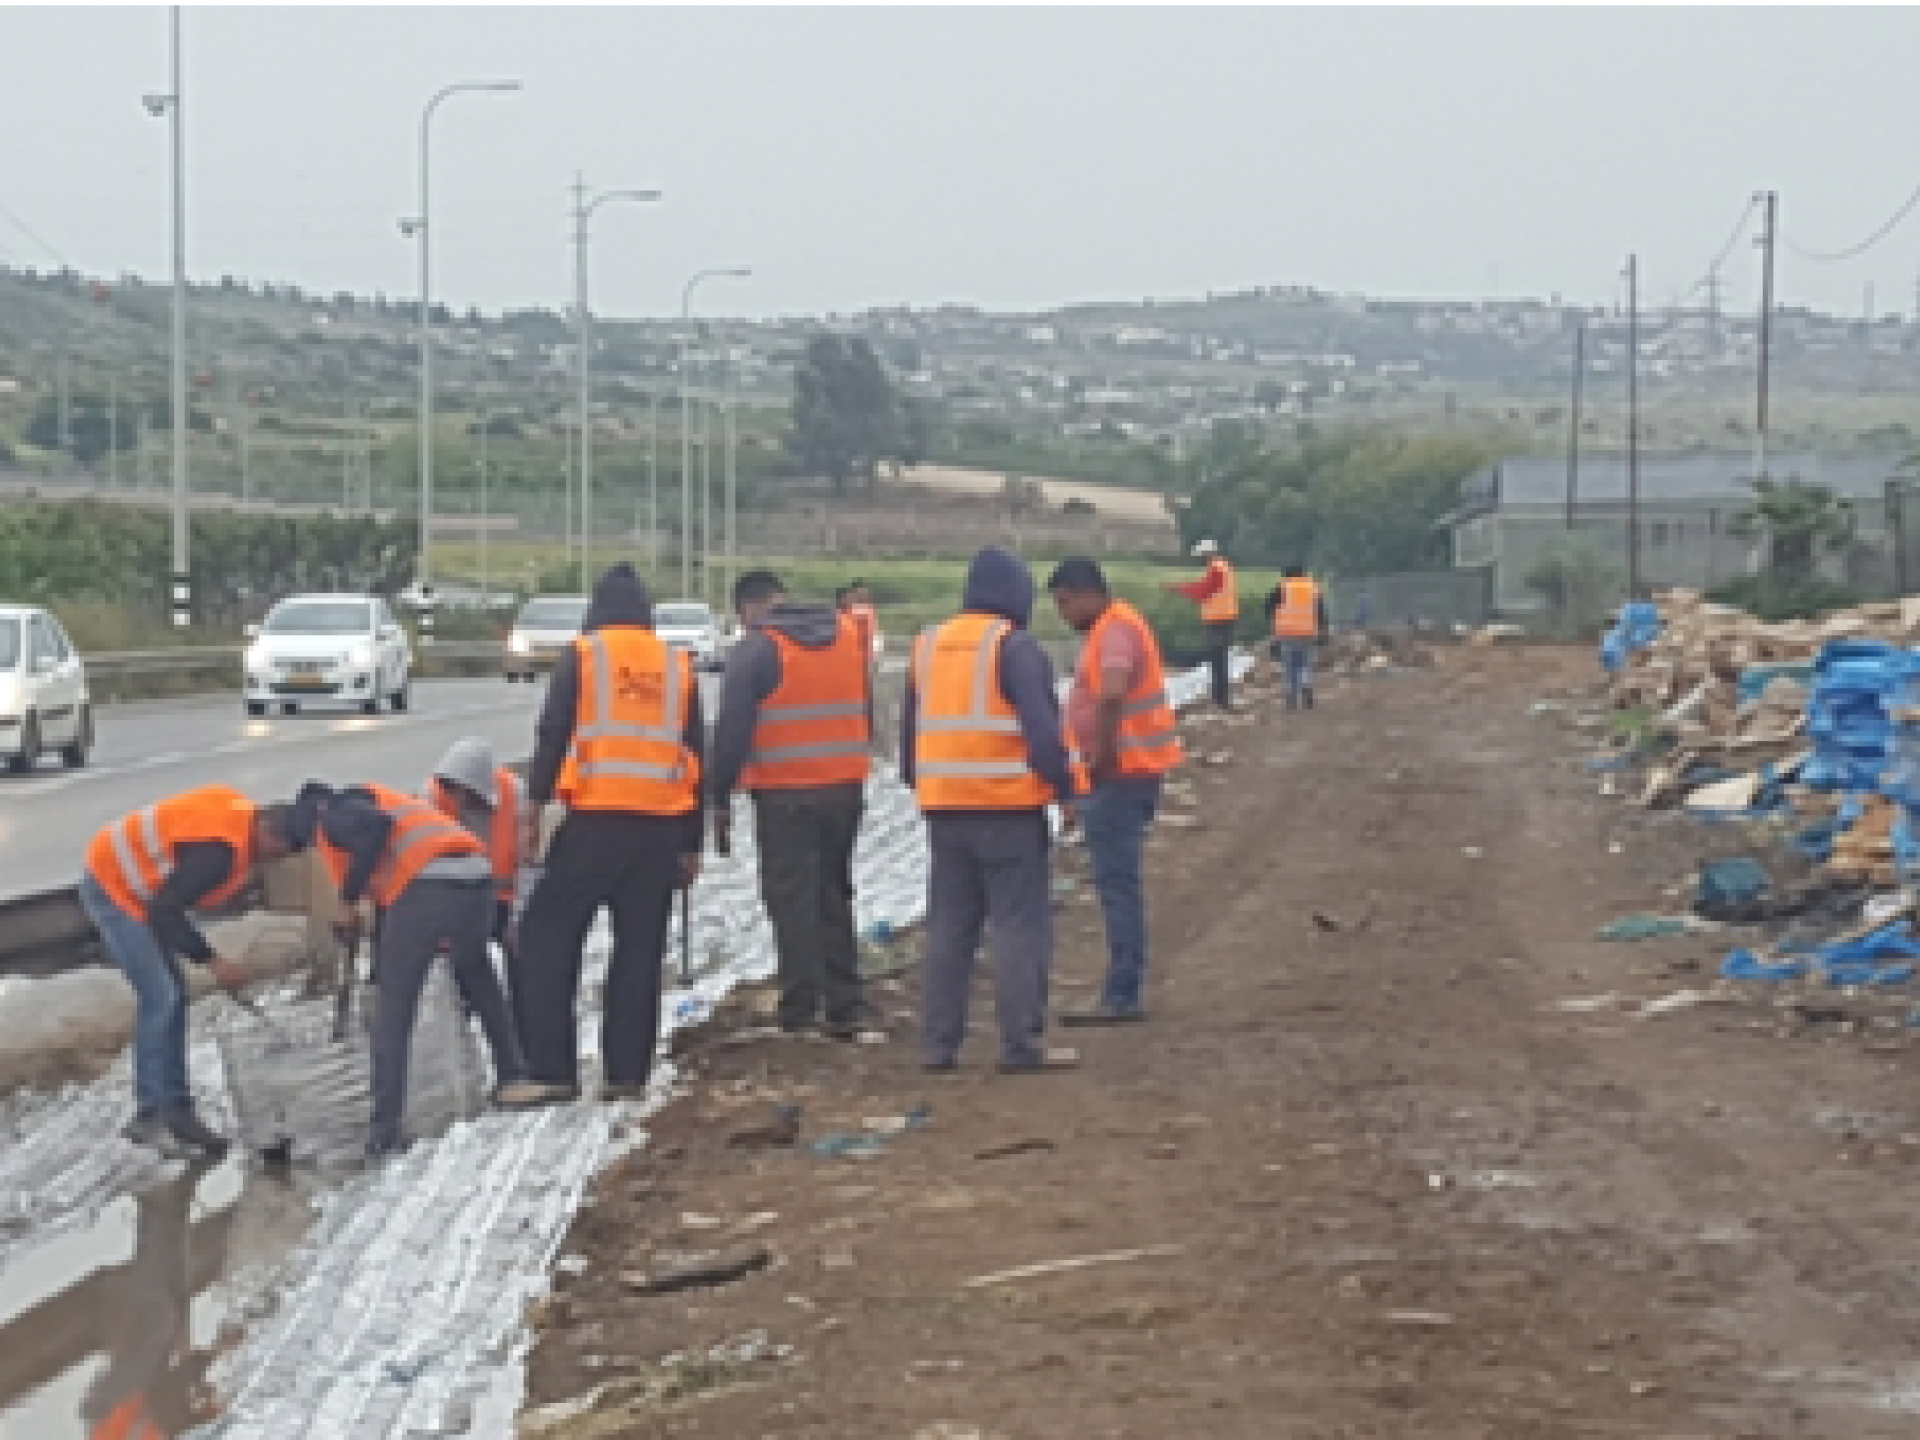 The workers are Bedouin from the Beersheba area